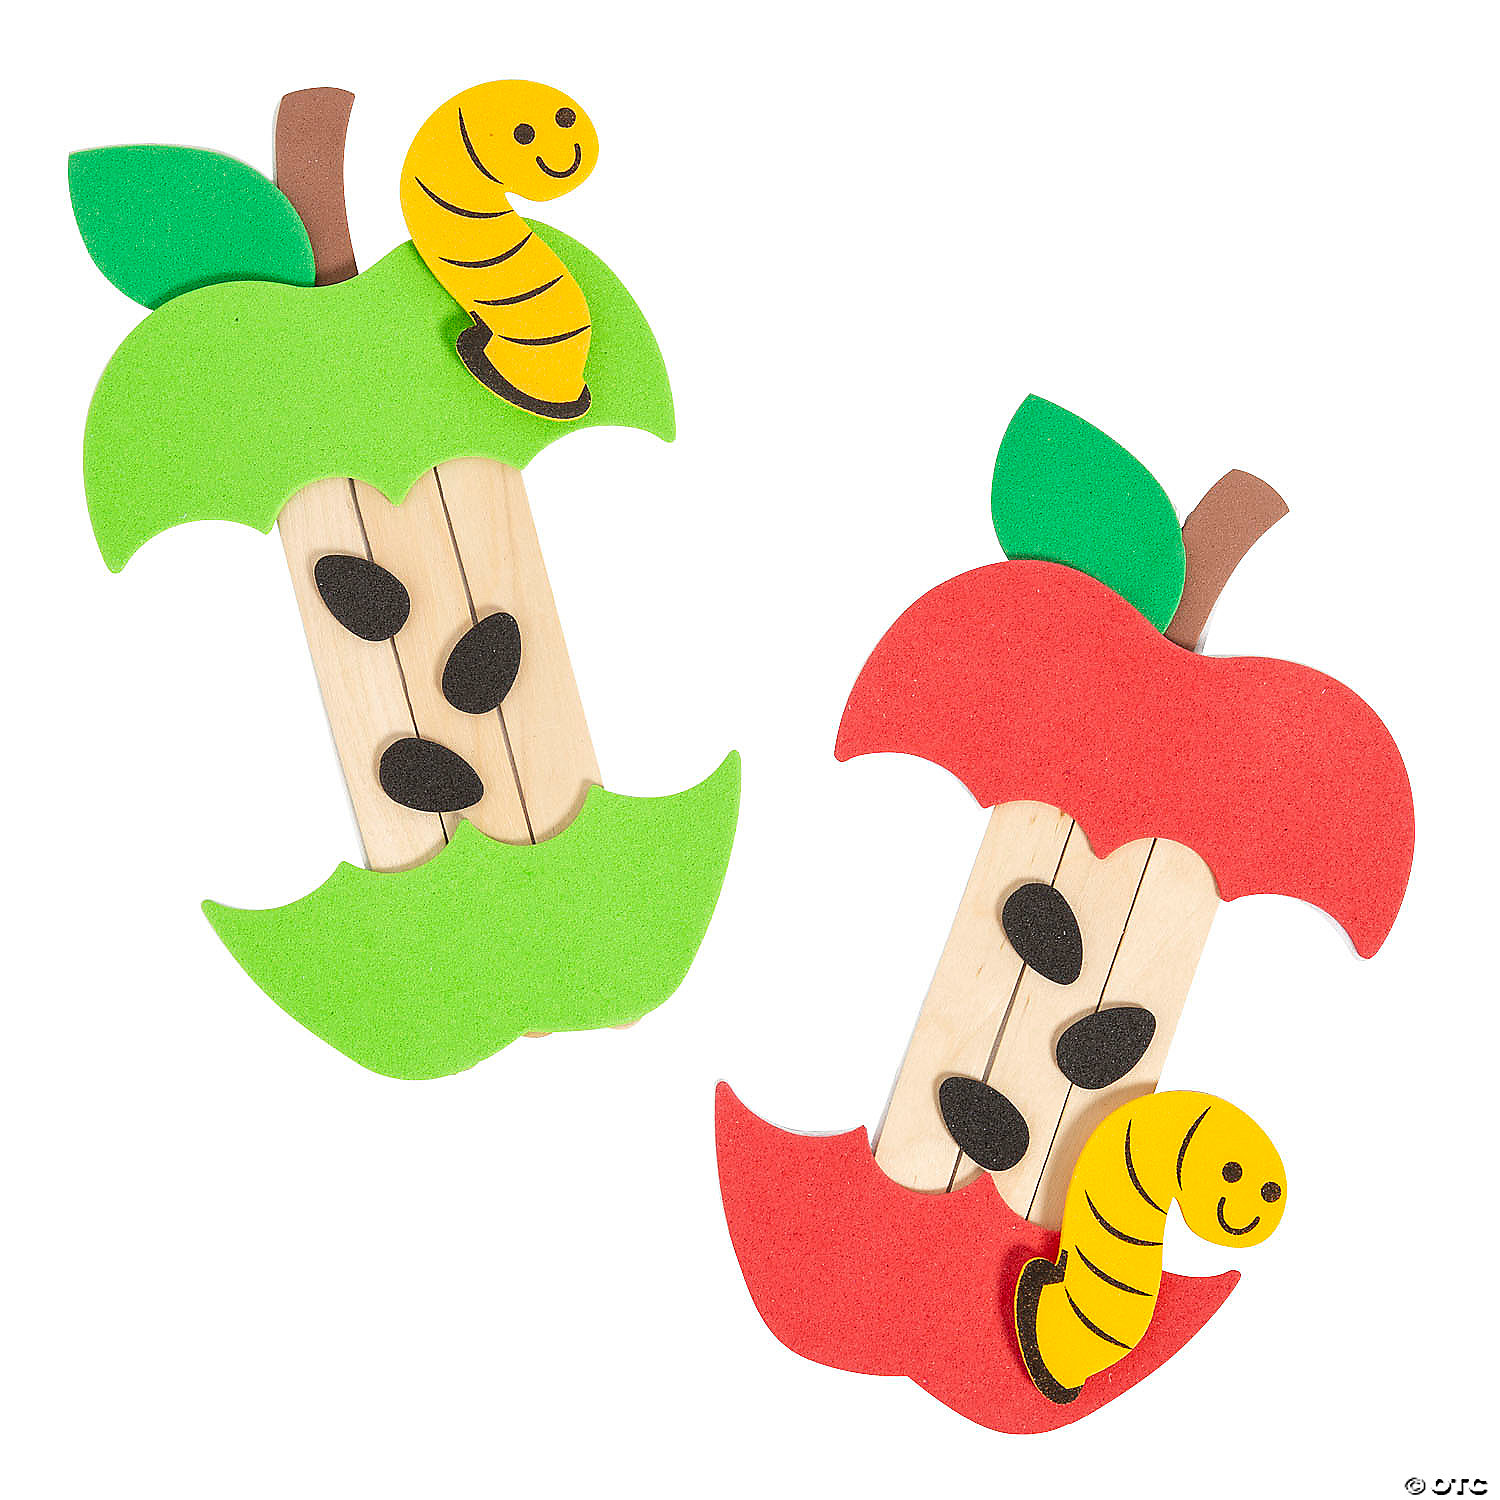 Popsicle Stick Apples - Kid Craft - Make and Takes